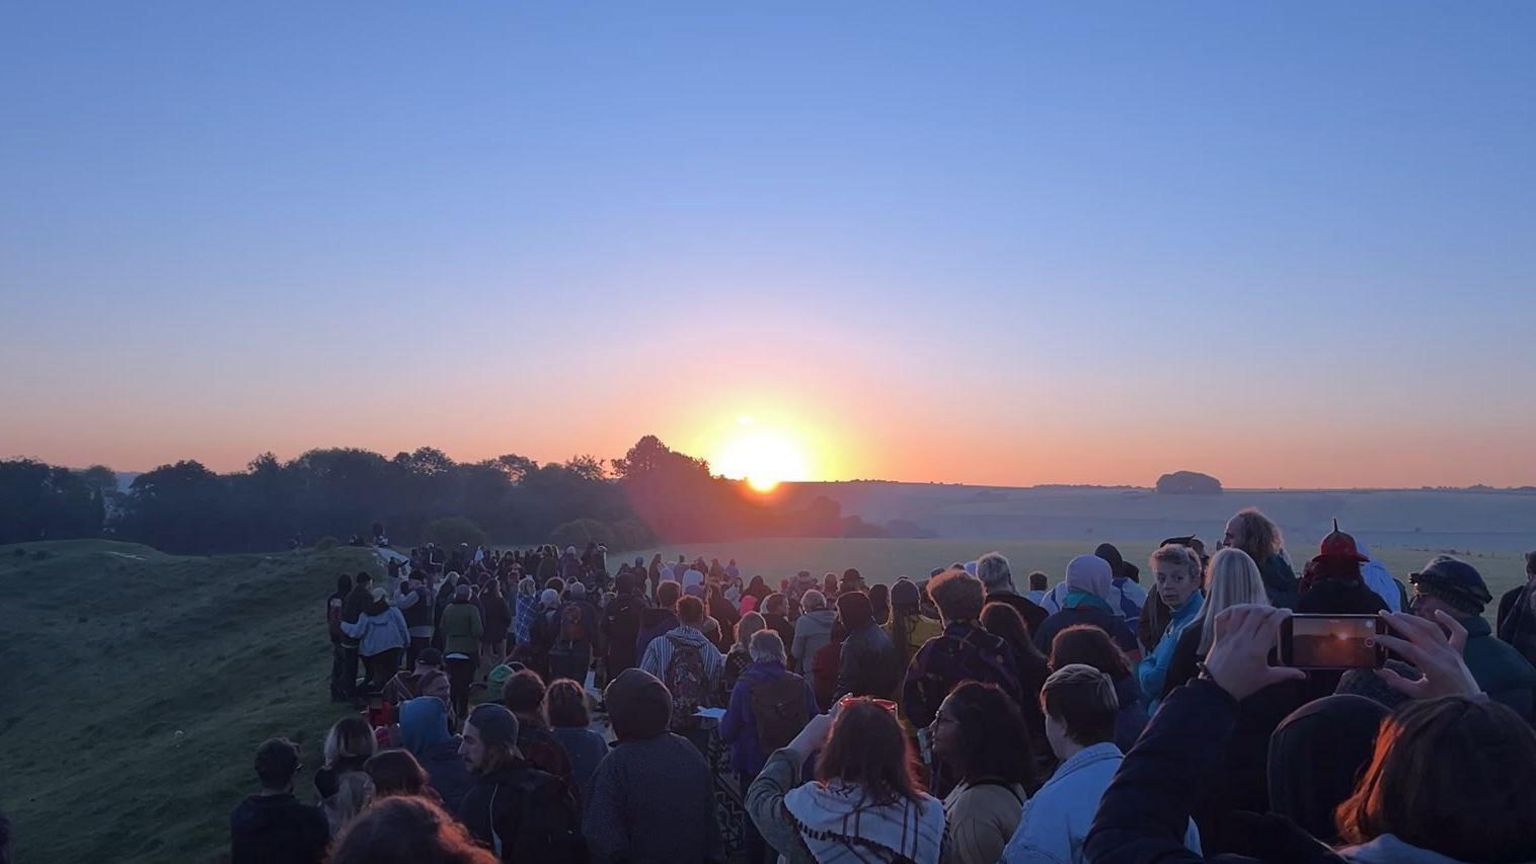 Crowd of people gathered along a bank at Avebury, with the sun rising